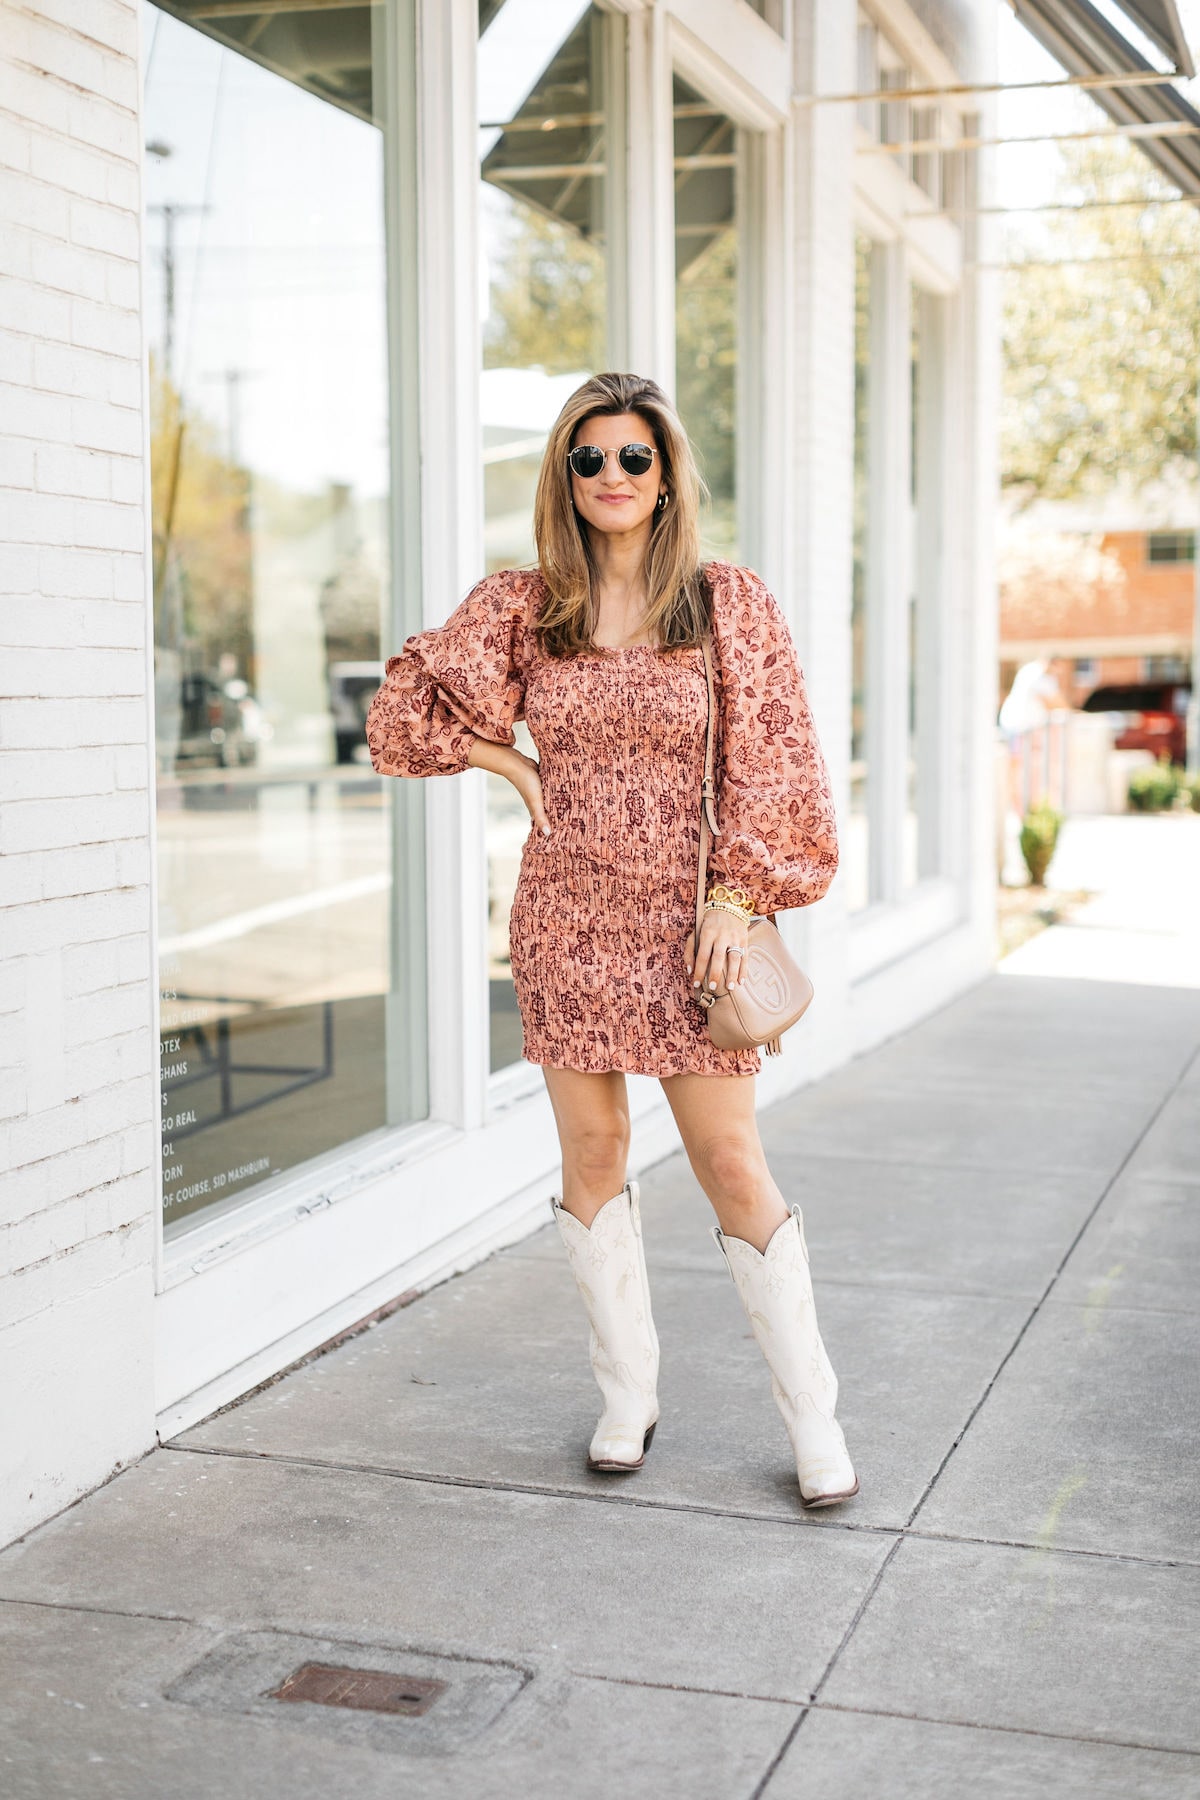 Brighton Butler wearing free people smocked dress and miron crosby boots